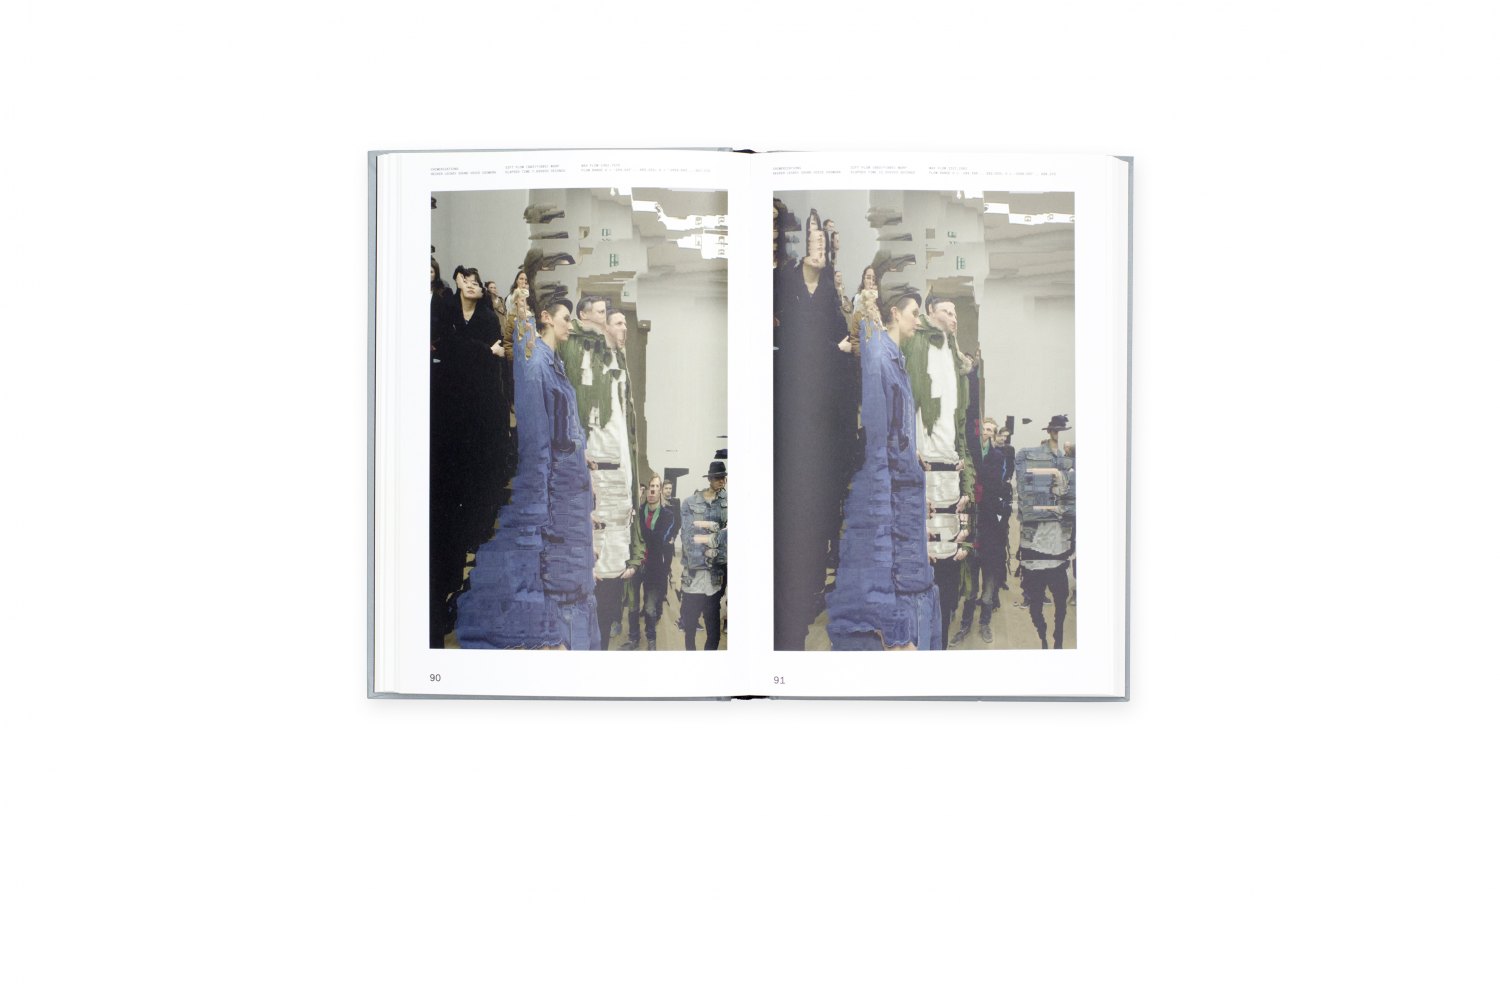 Florian Hecker, Chimerizations introd. by Catherine Wood, New York 2013, 304 p.  ISBN 978-0-98513-642-0